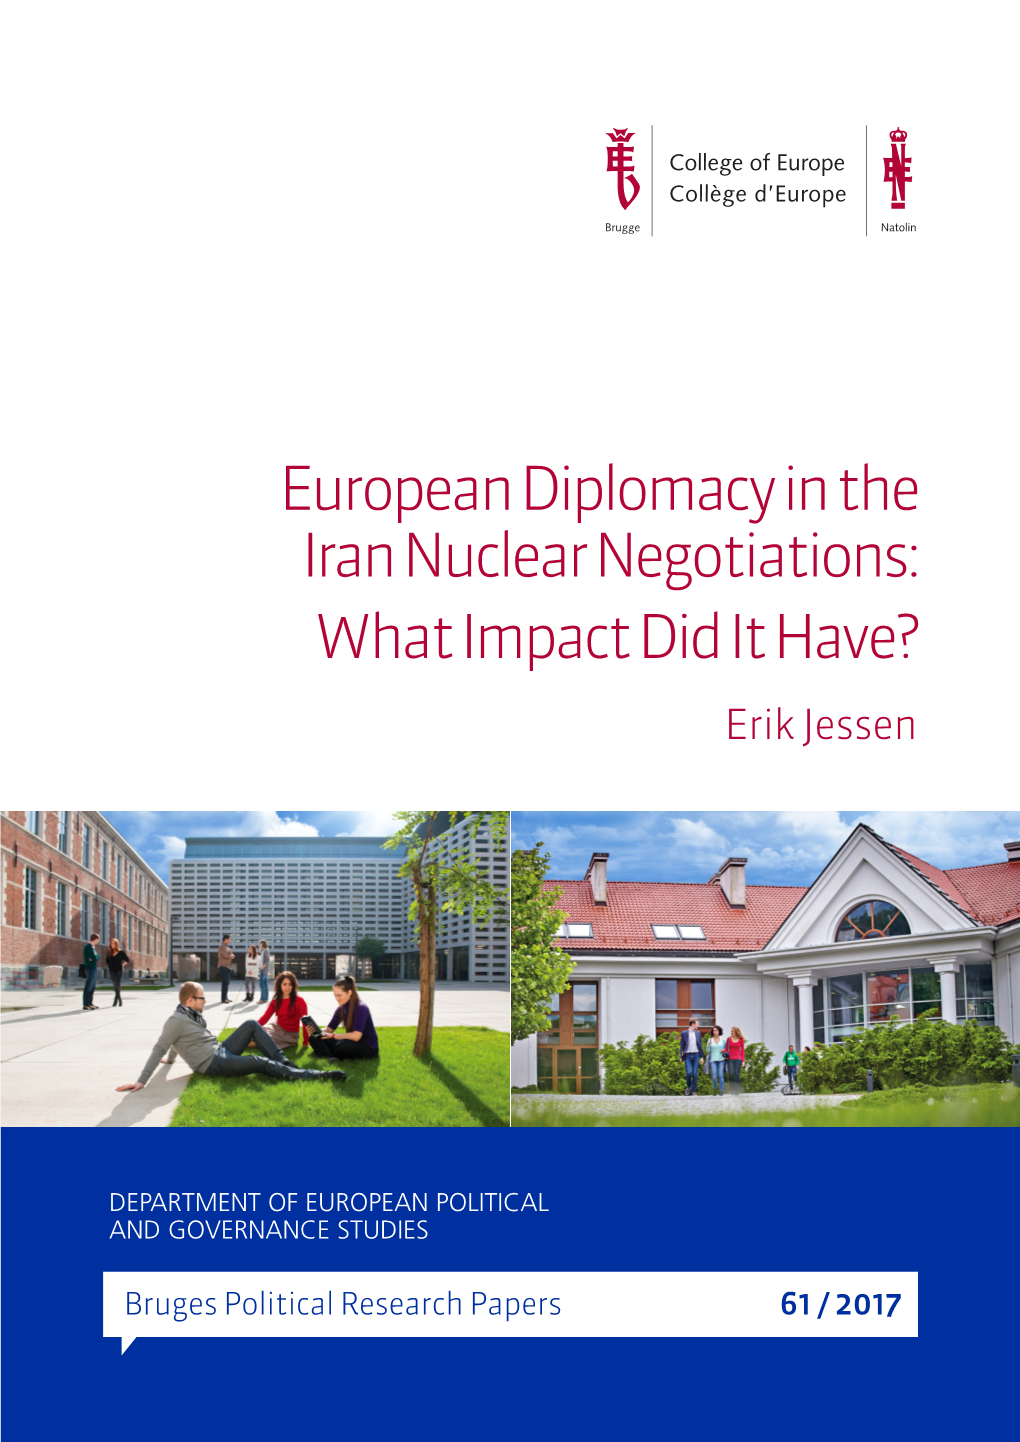 European Diplomacy in the Iran Nuclear Negotiations: What Impact Did It Have? Erik Jessen